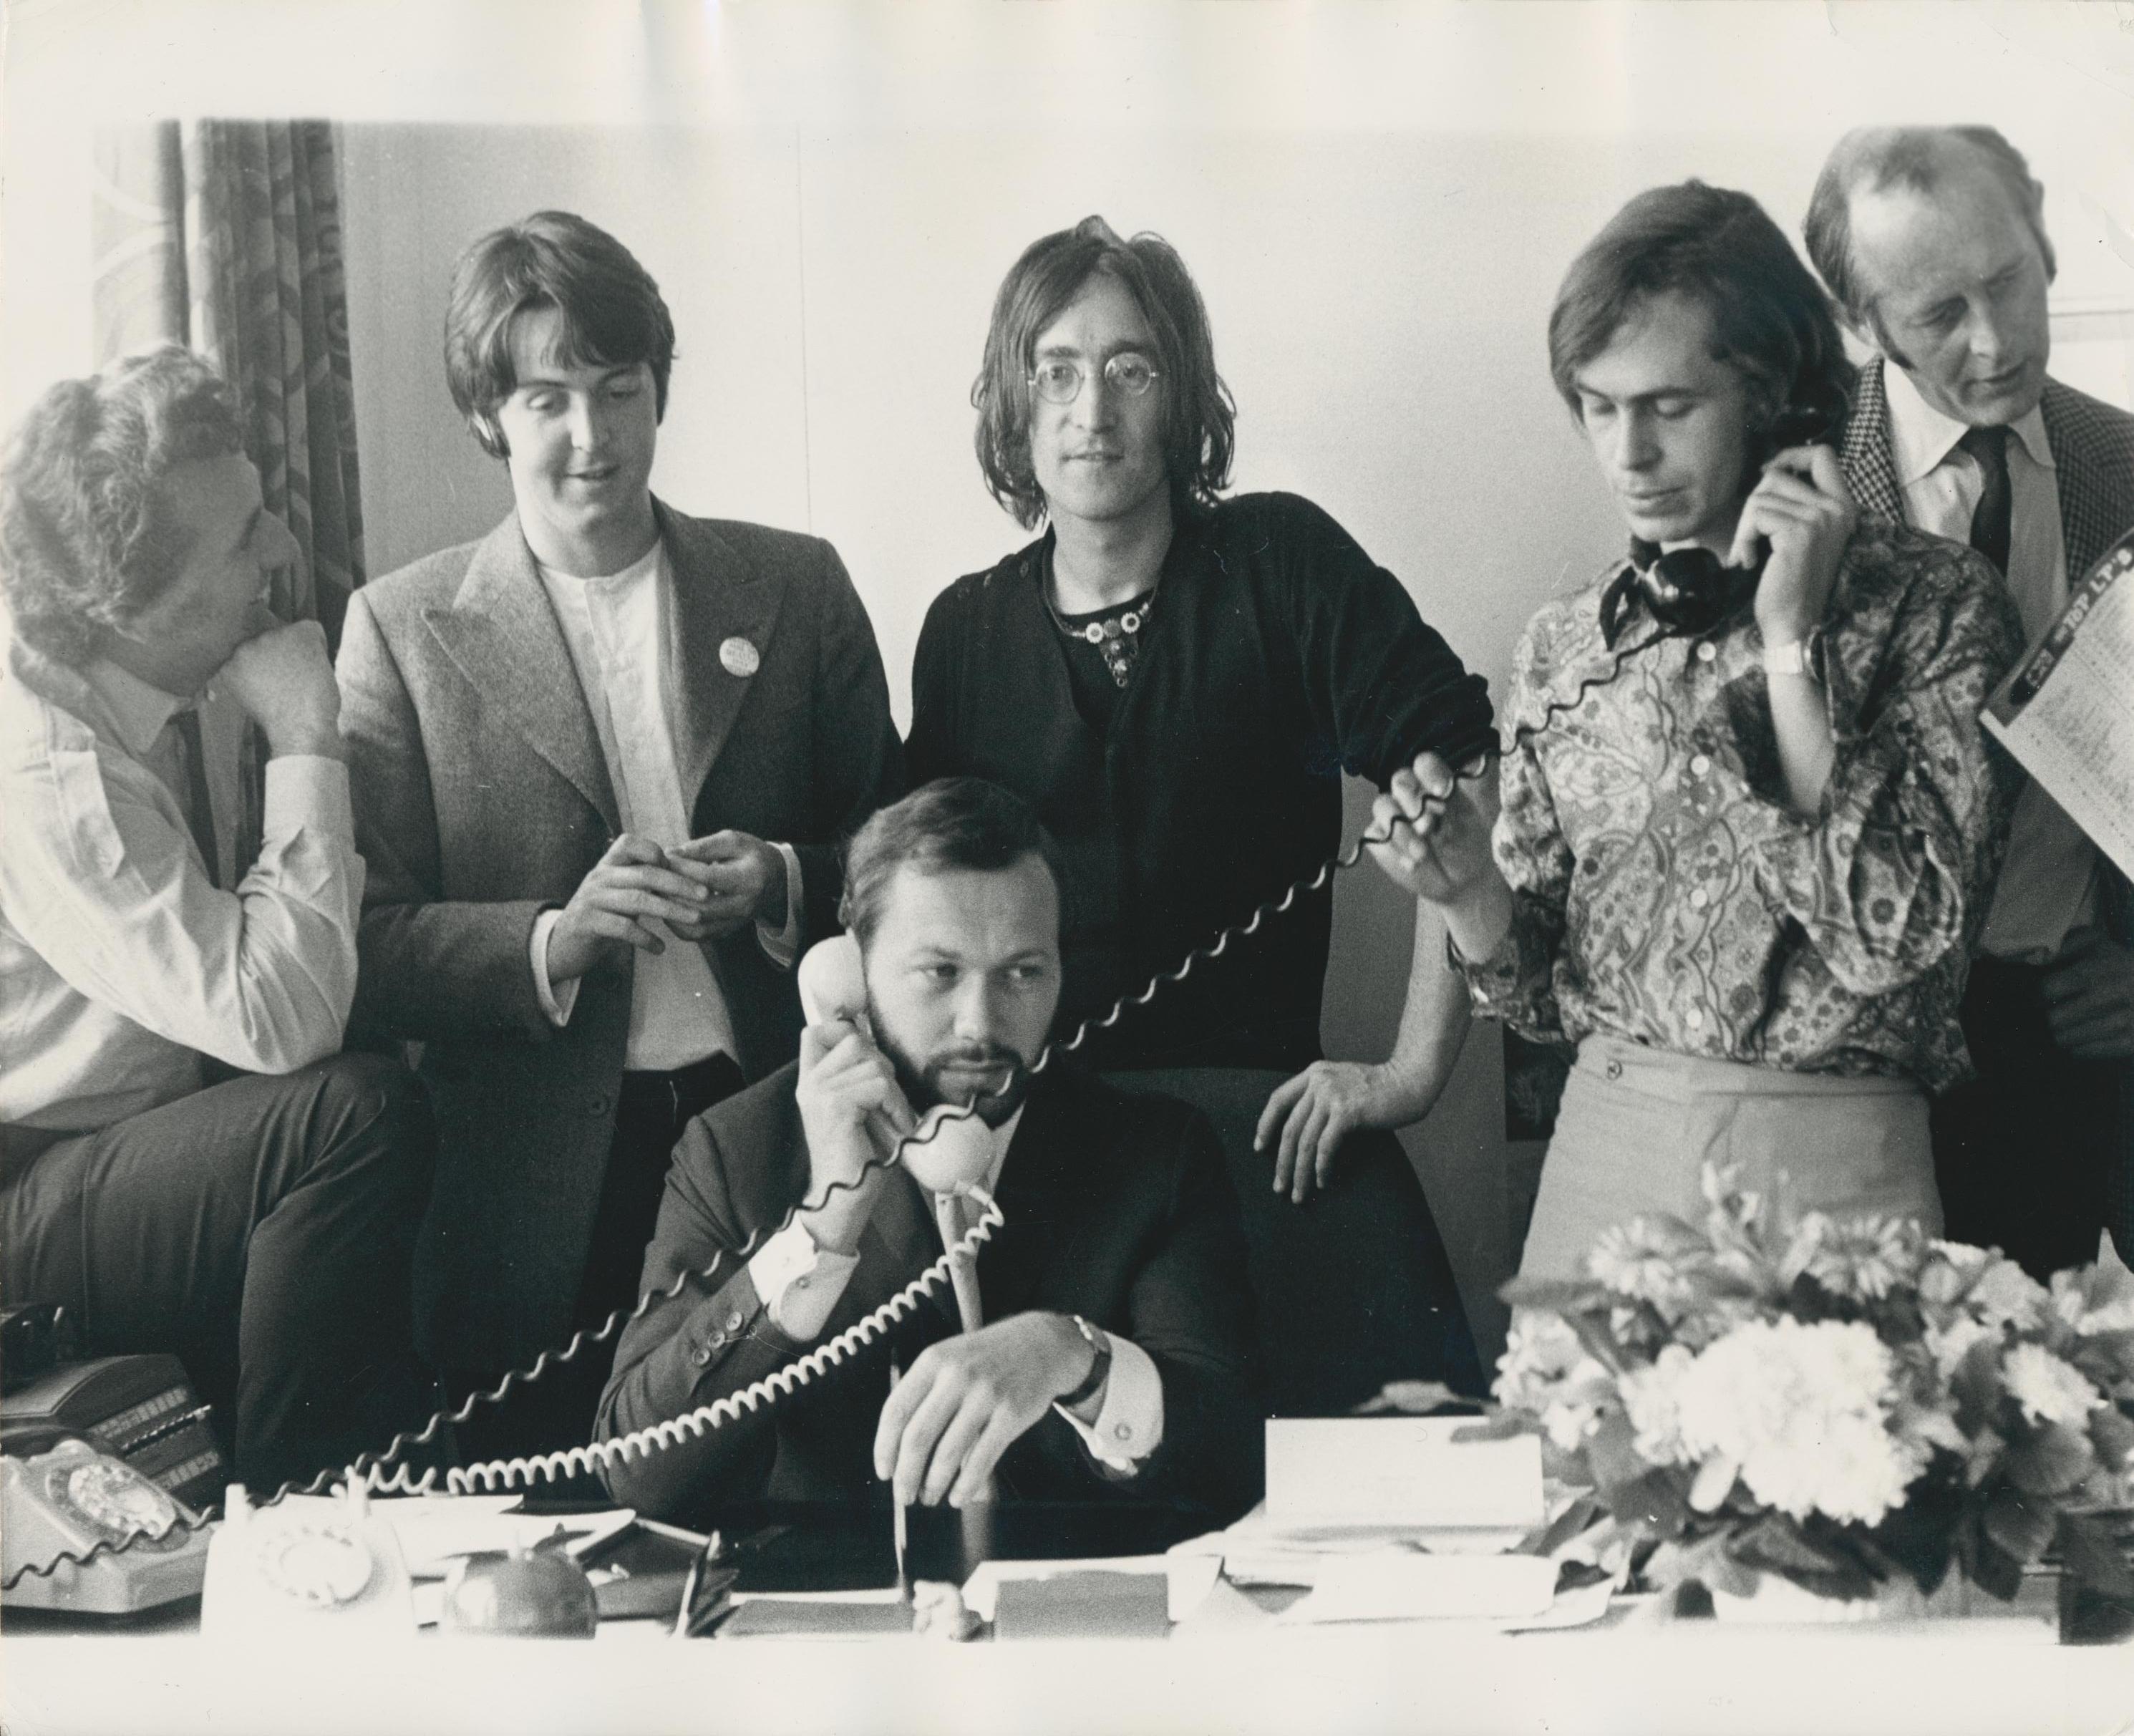 Unknown Portrait Photograph - The Beatles, Office, Black and White Photography, 20, 7 x 25, 4 cm